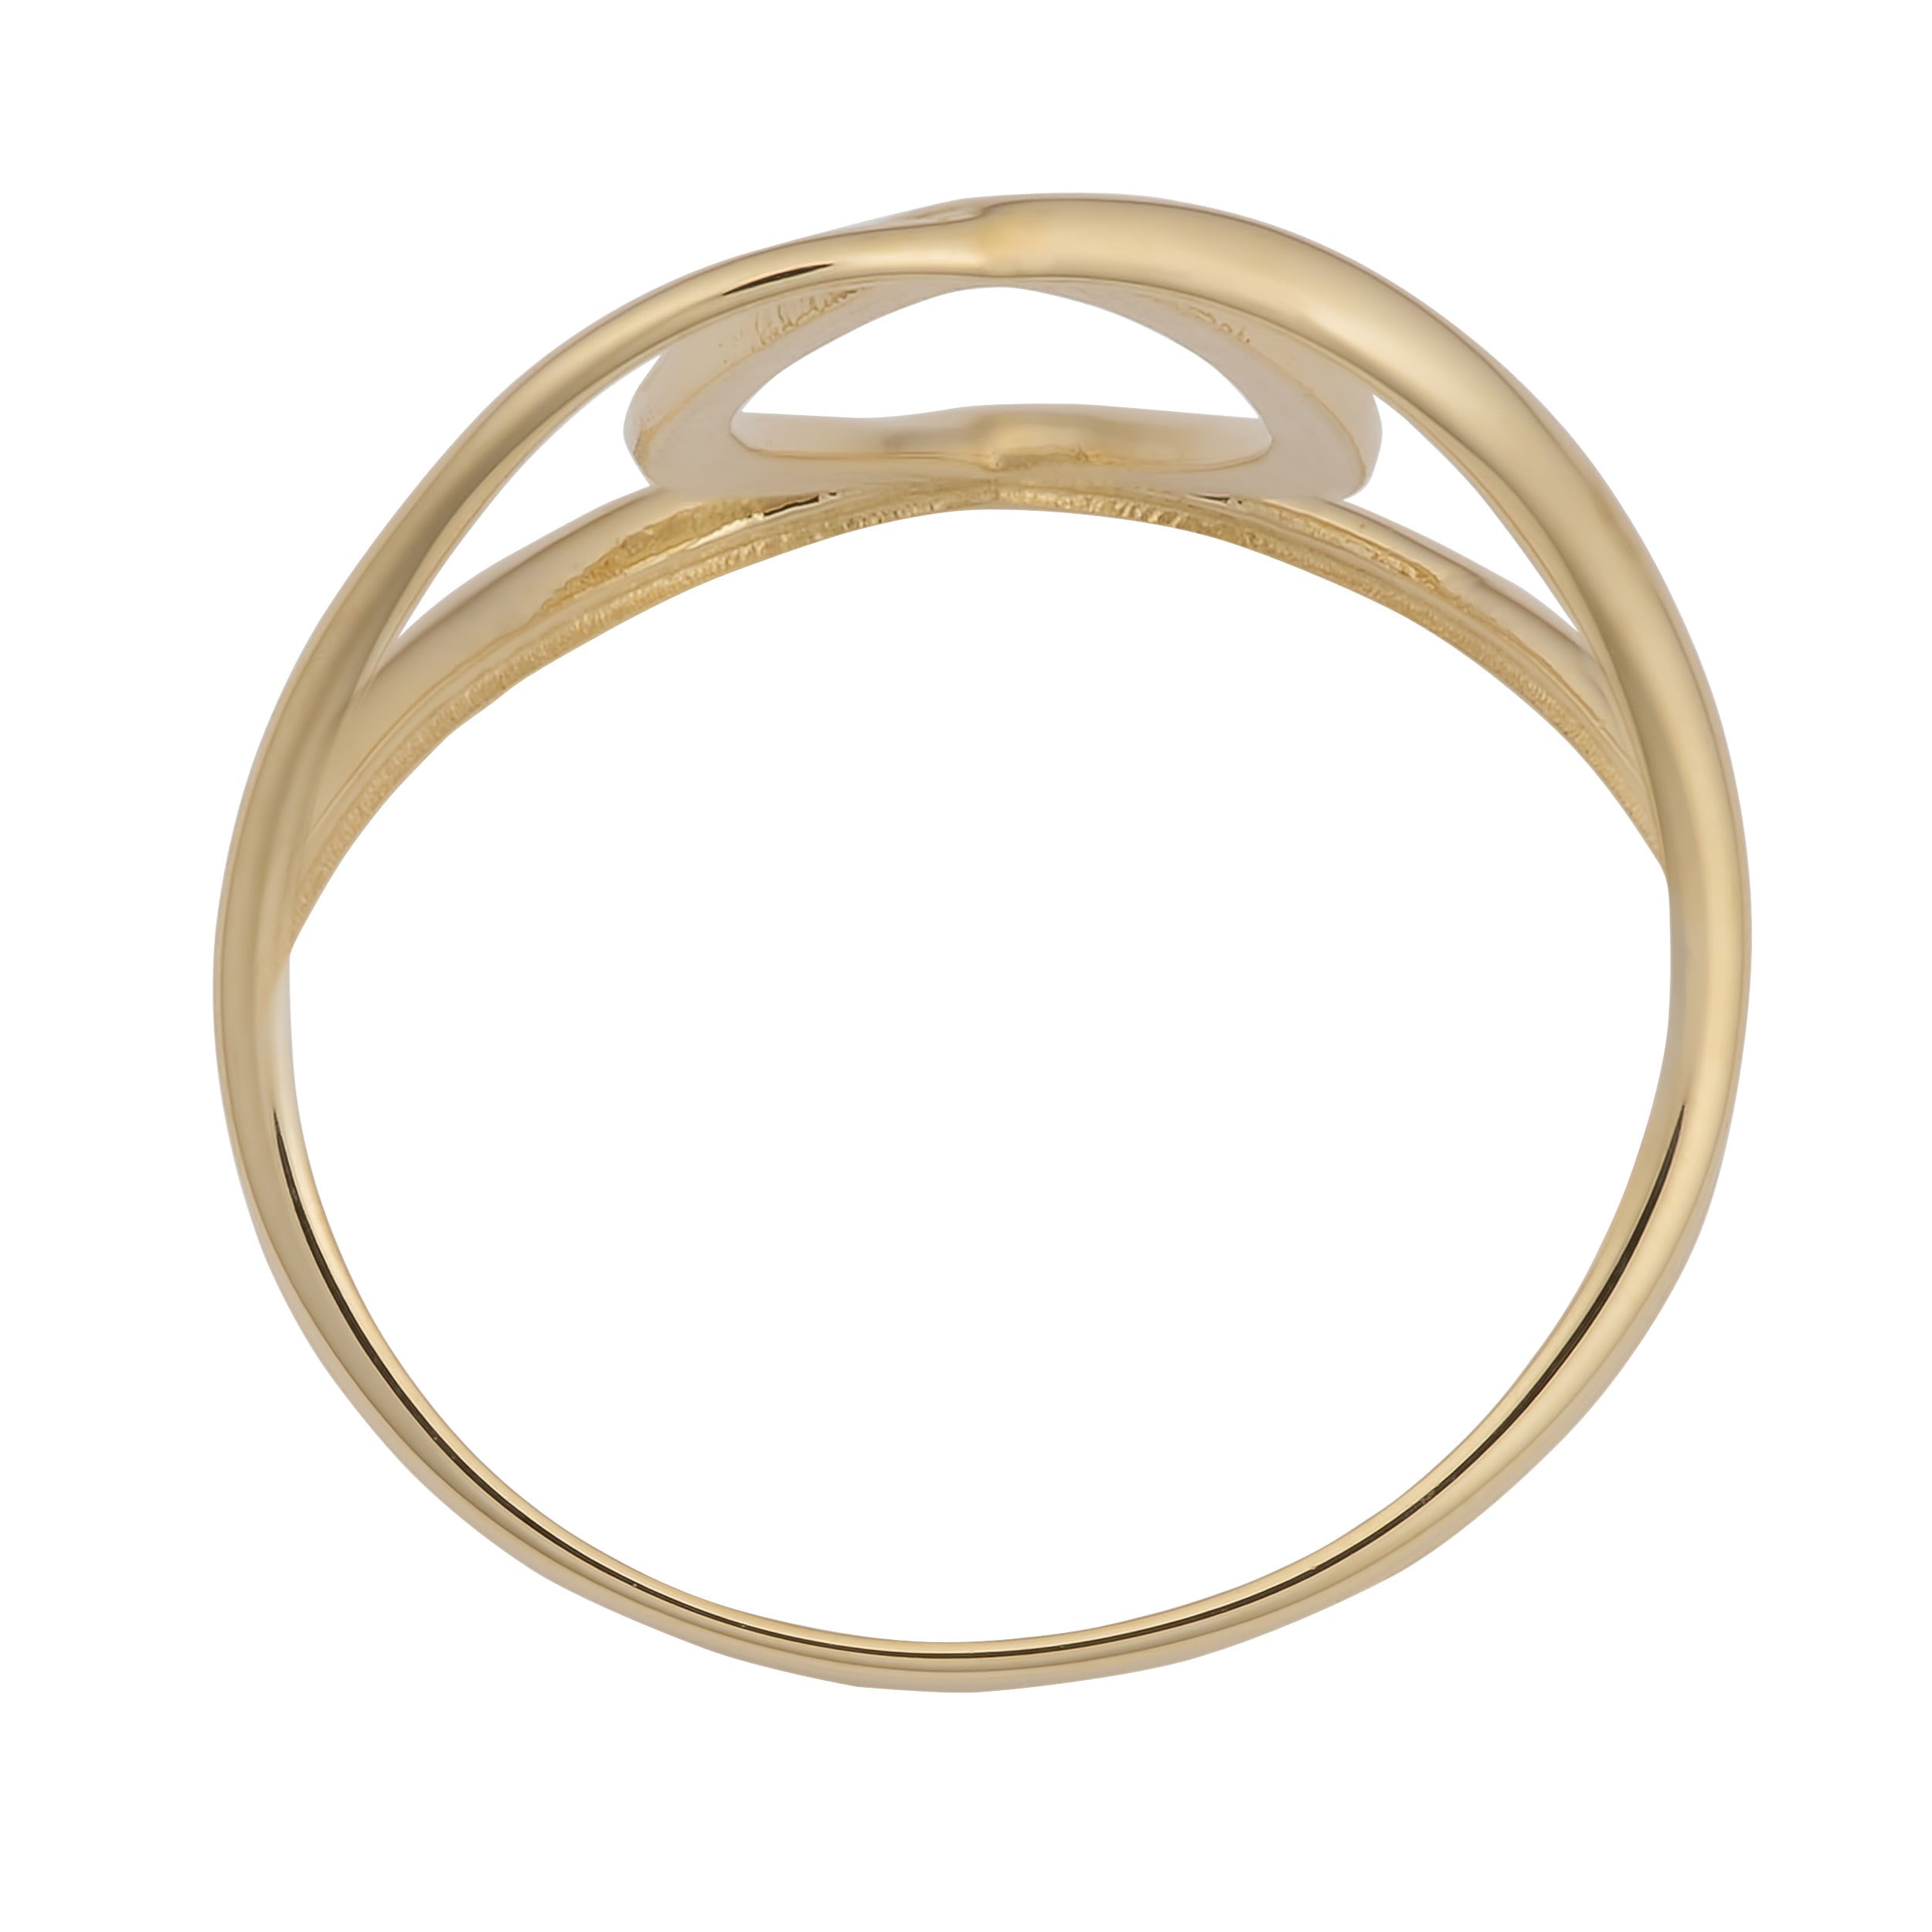 14k Yellow Gold Wide Knot Fashion Ring